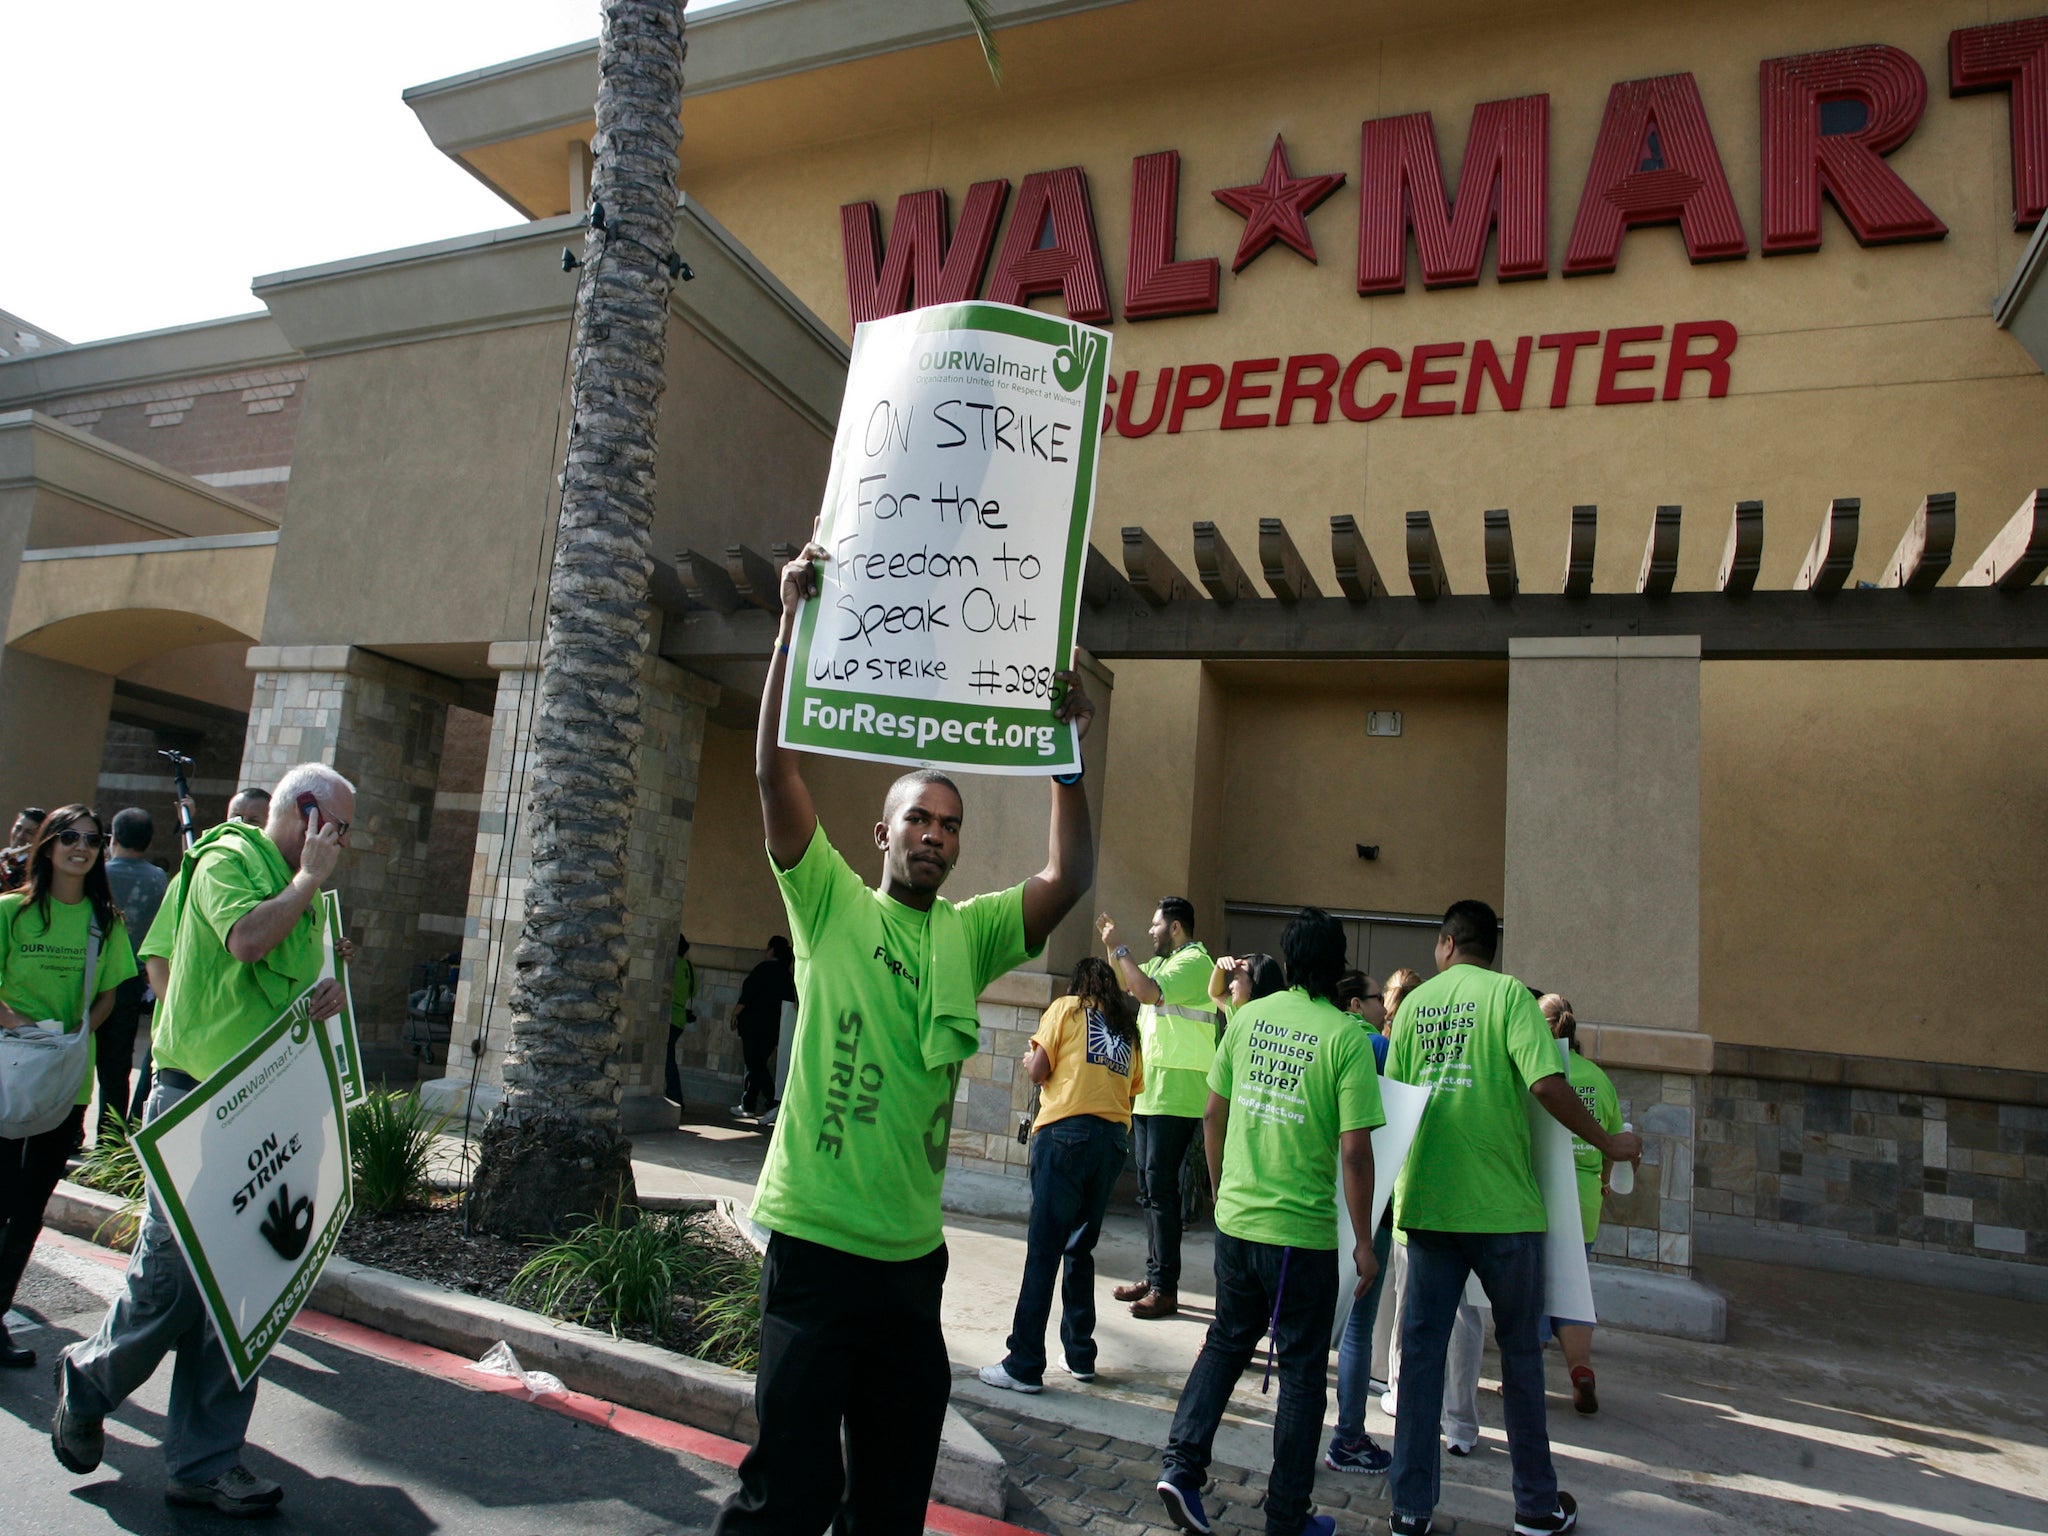 Workers protested outside the Wal-Mart store in Pico Rivera, California